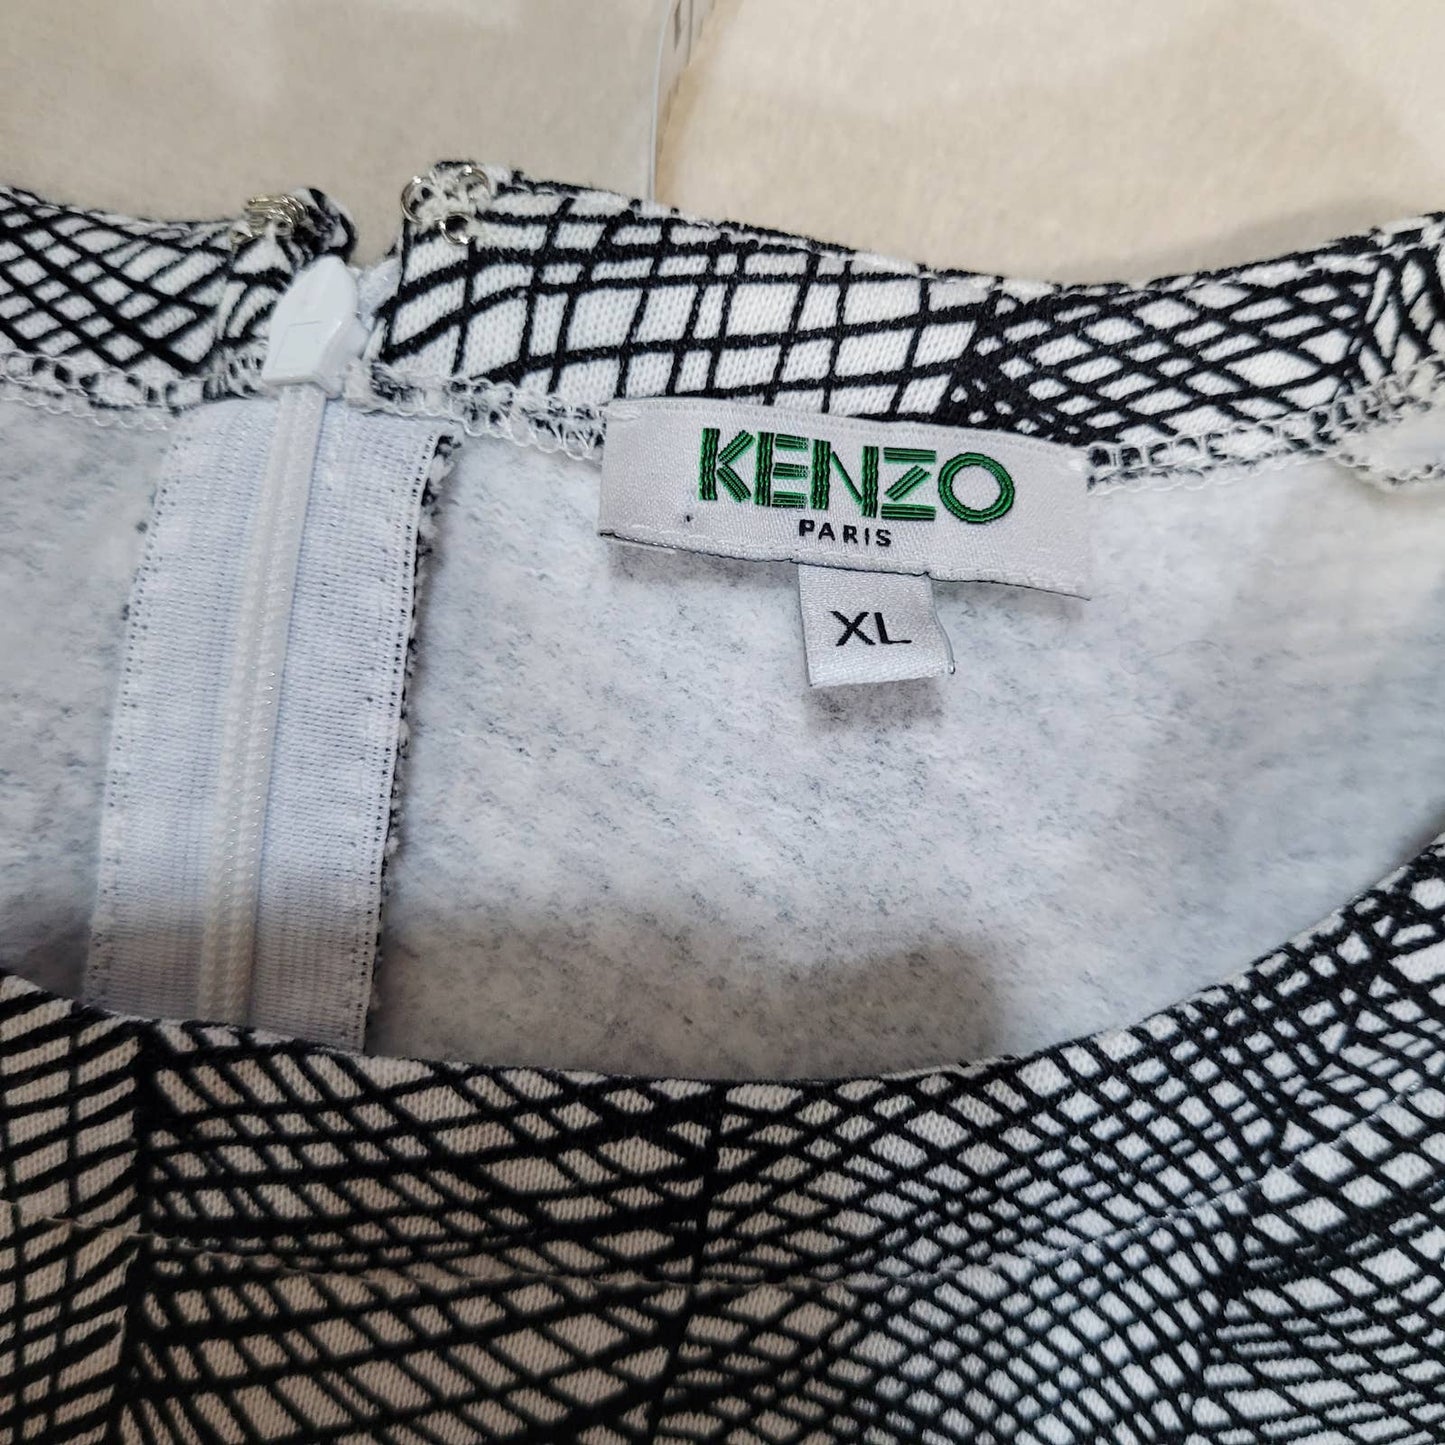 Kenzo Abstract Striped Fleece Lined Skater Dress - Size 12